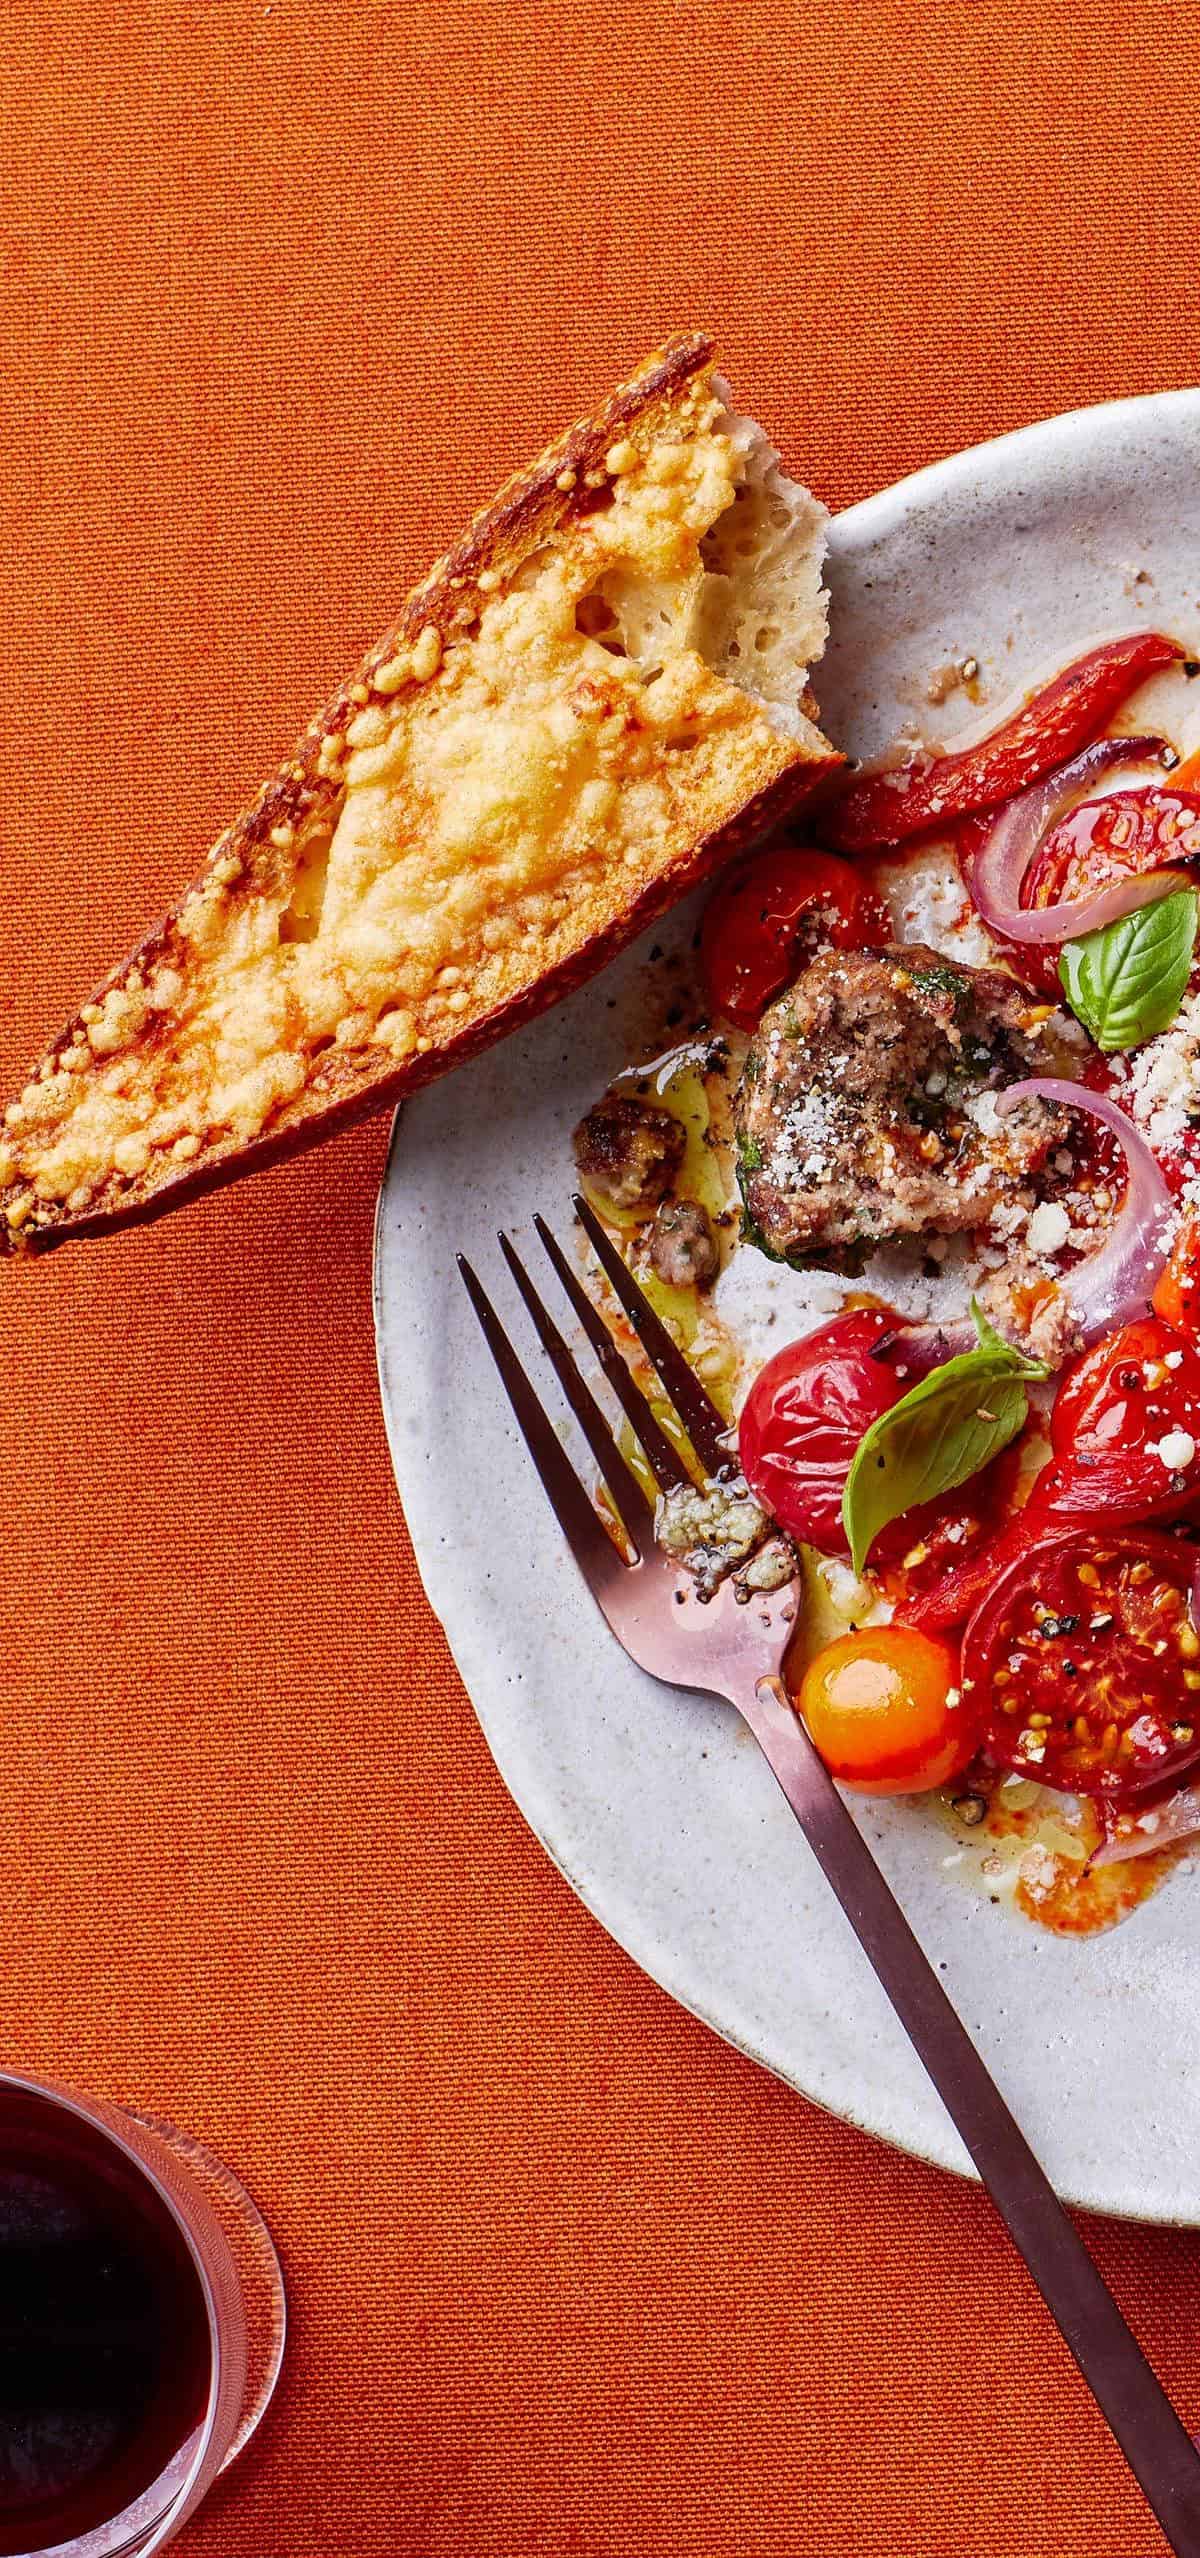  Looking for a dish to impress your guests? These Cherry Tomato Meatballs should do the trick.